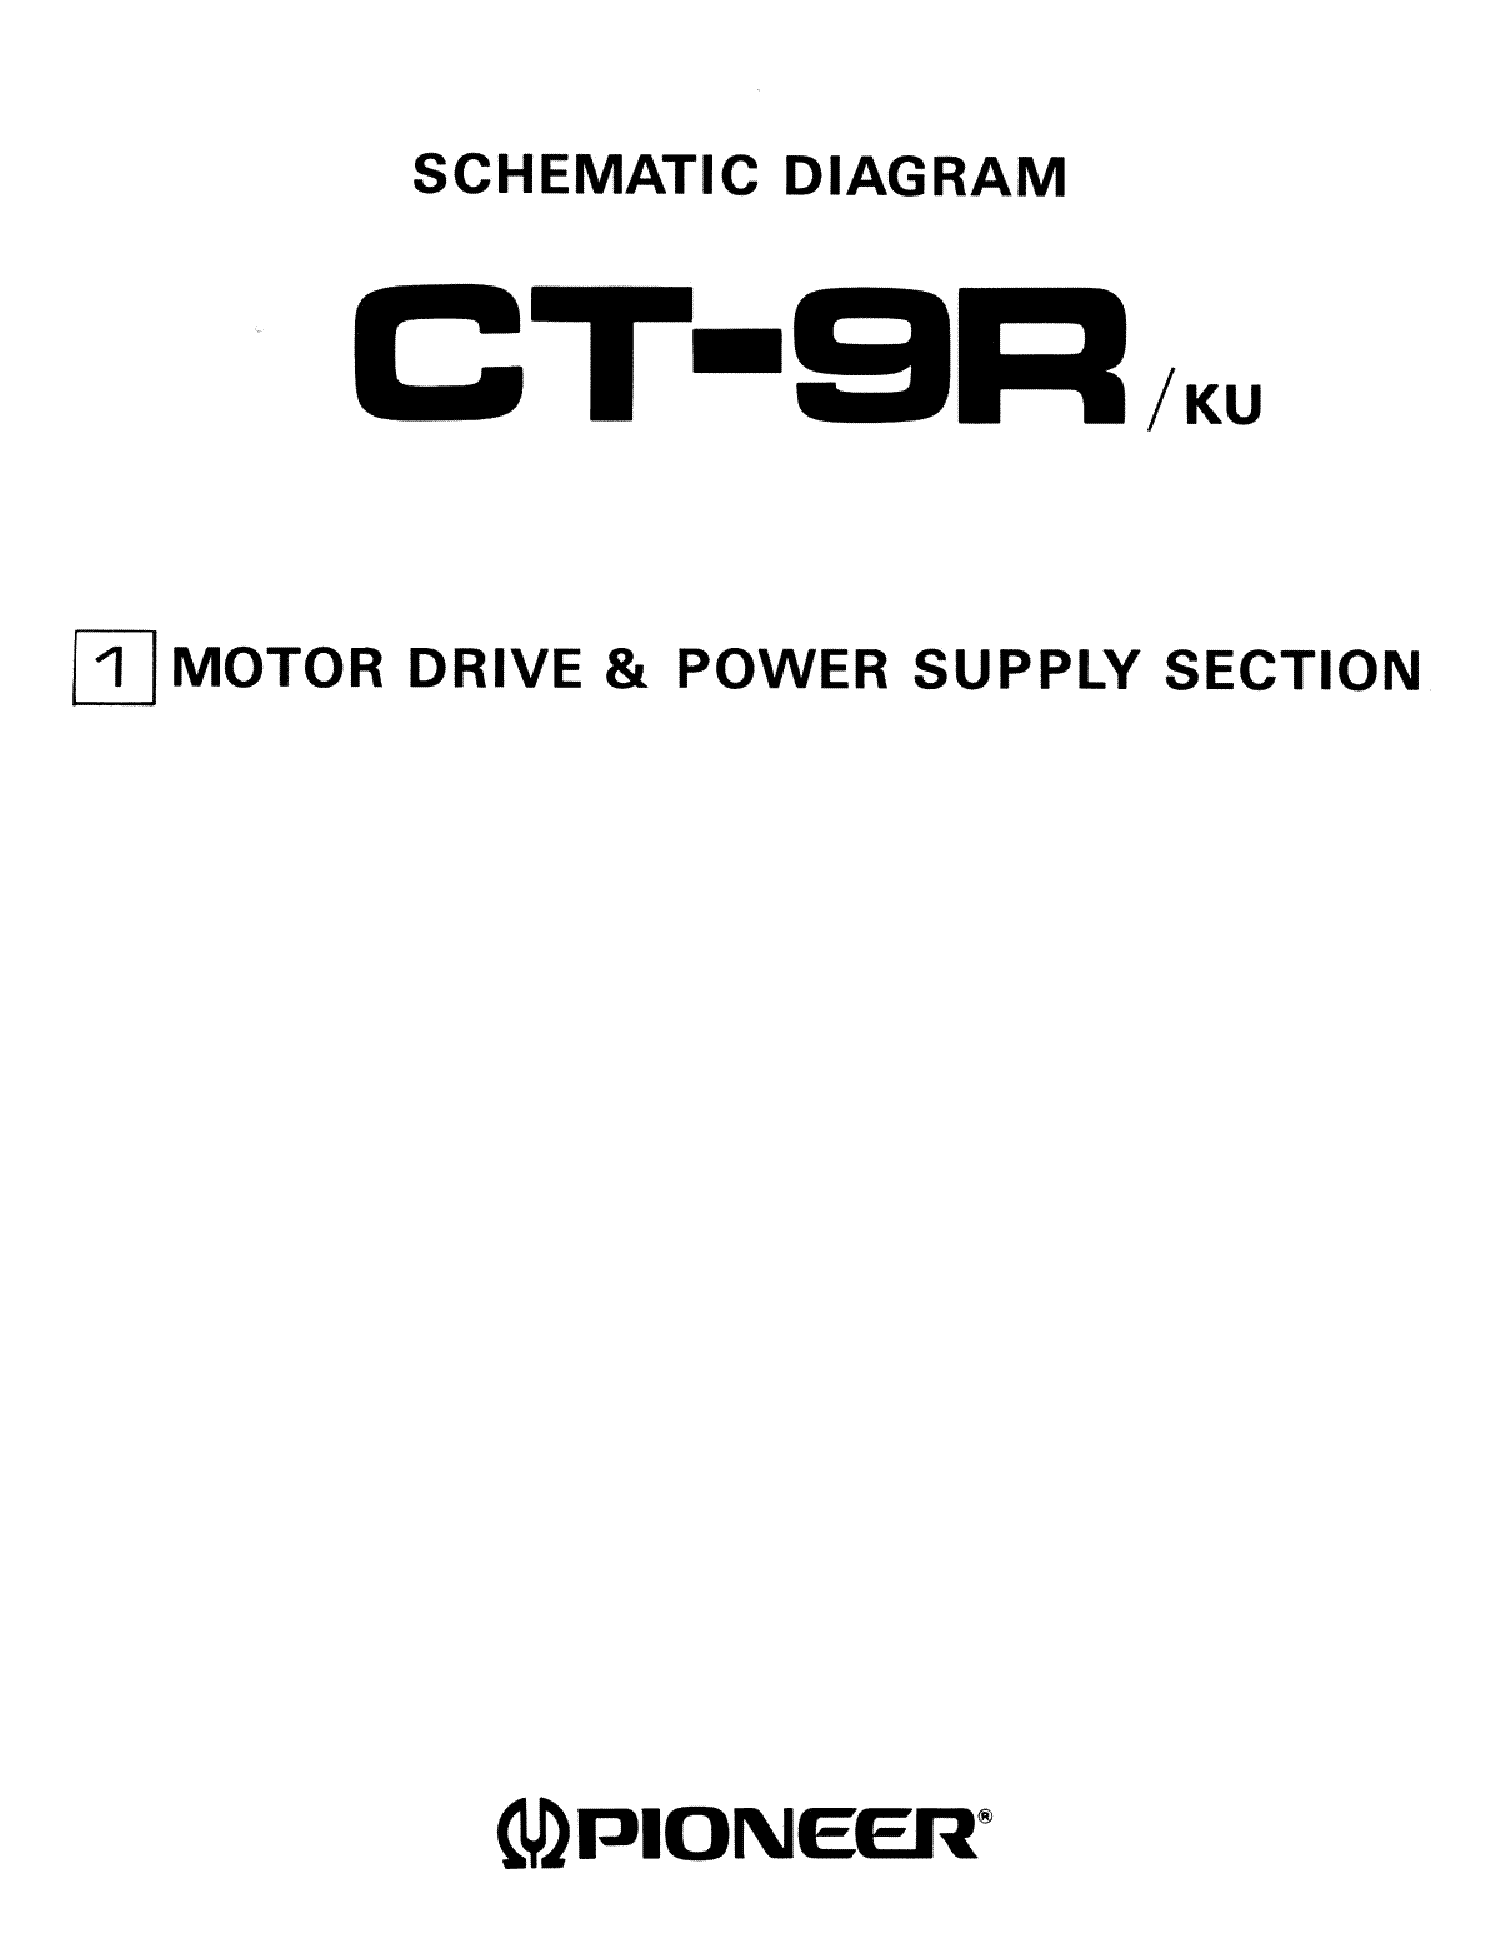 PIONEER CT-9R SCH service manual (1st page)